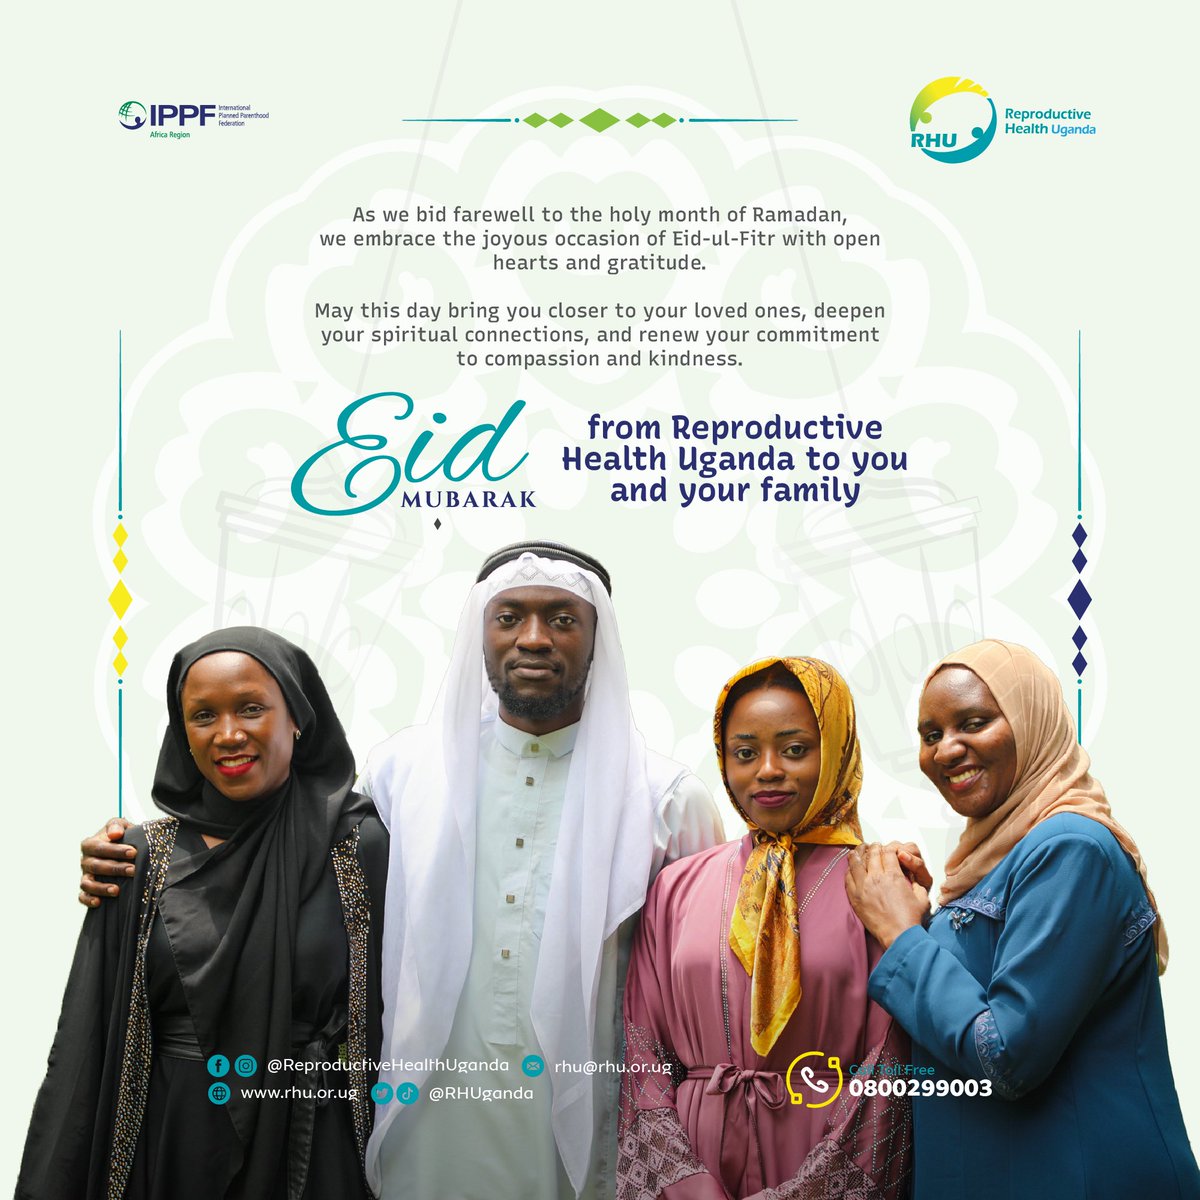 From all of us at Reproductive Health Uganda, we would like to wish the entire moslem community a happy Eid. May Allah accept all your prayers and sacrifices. #EidAlFitr